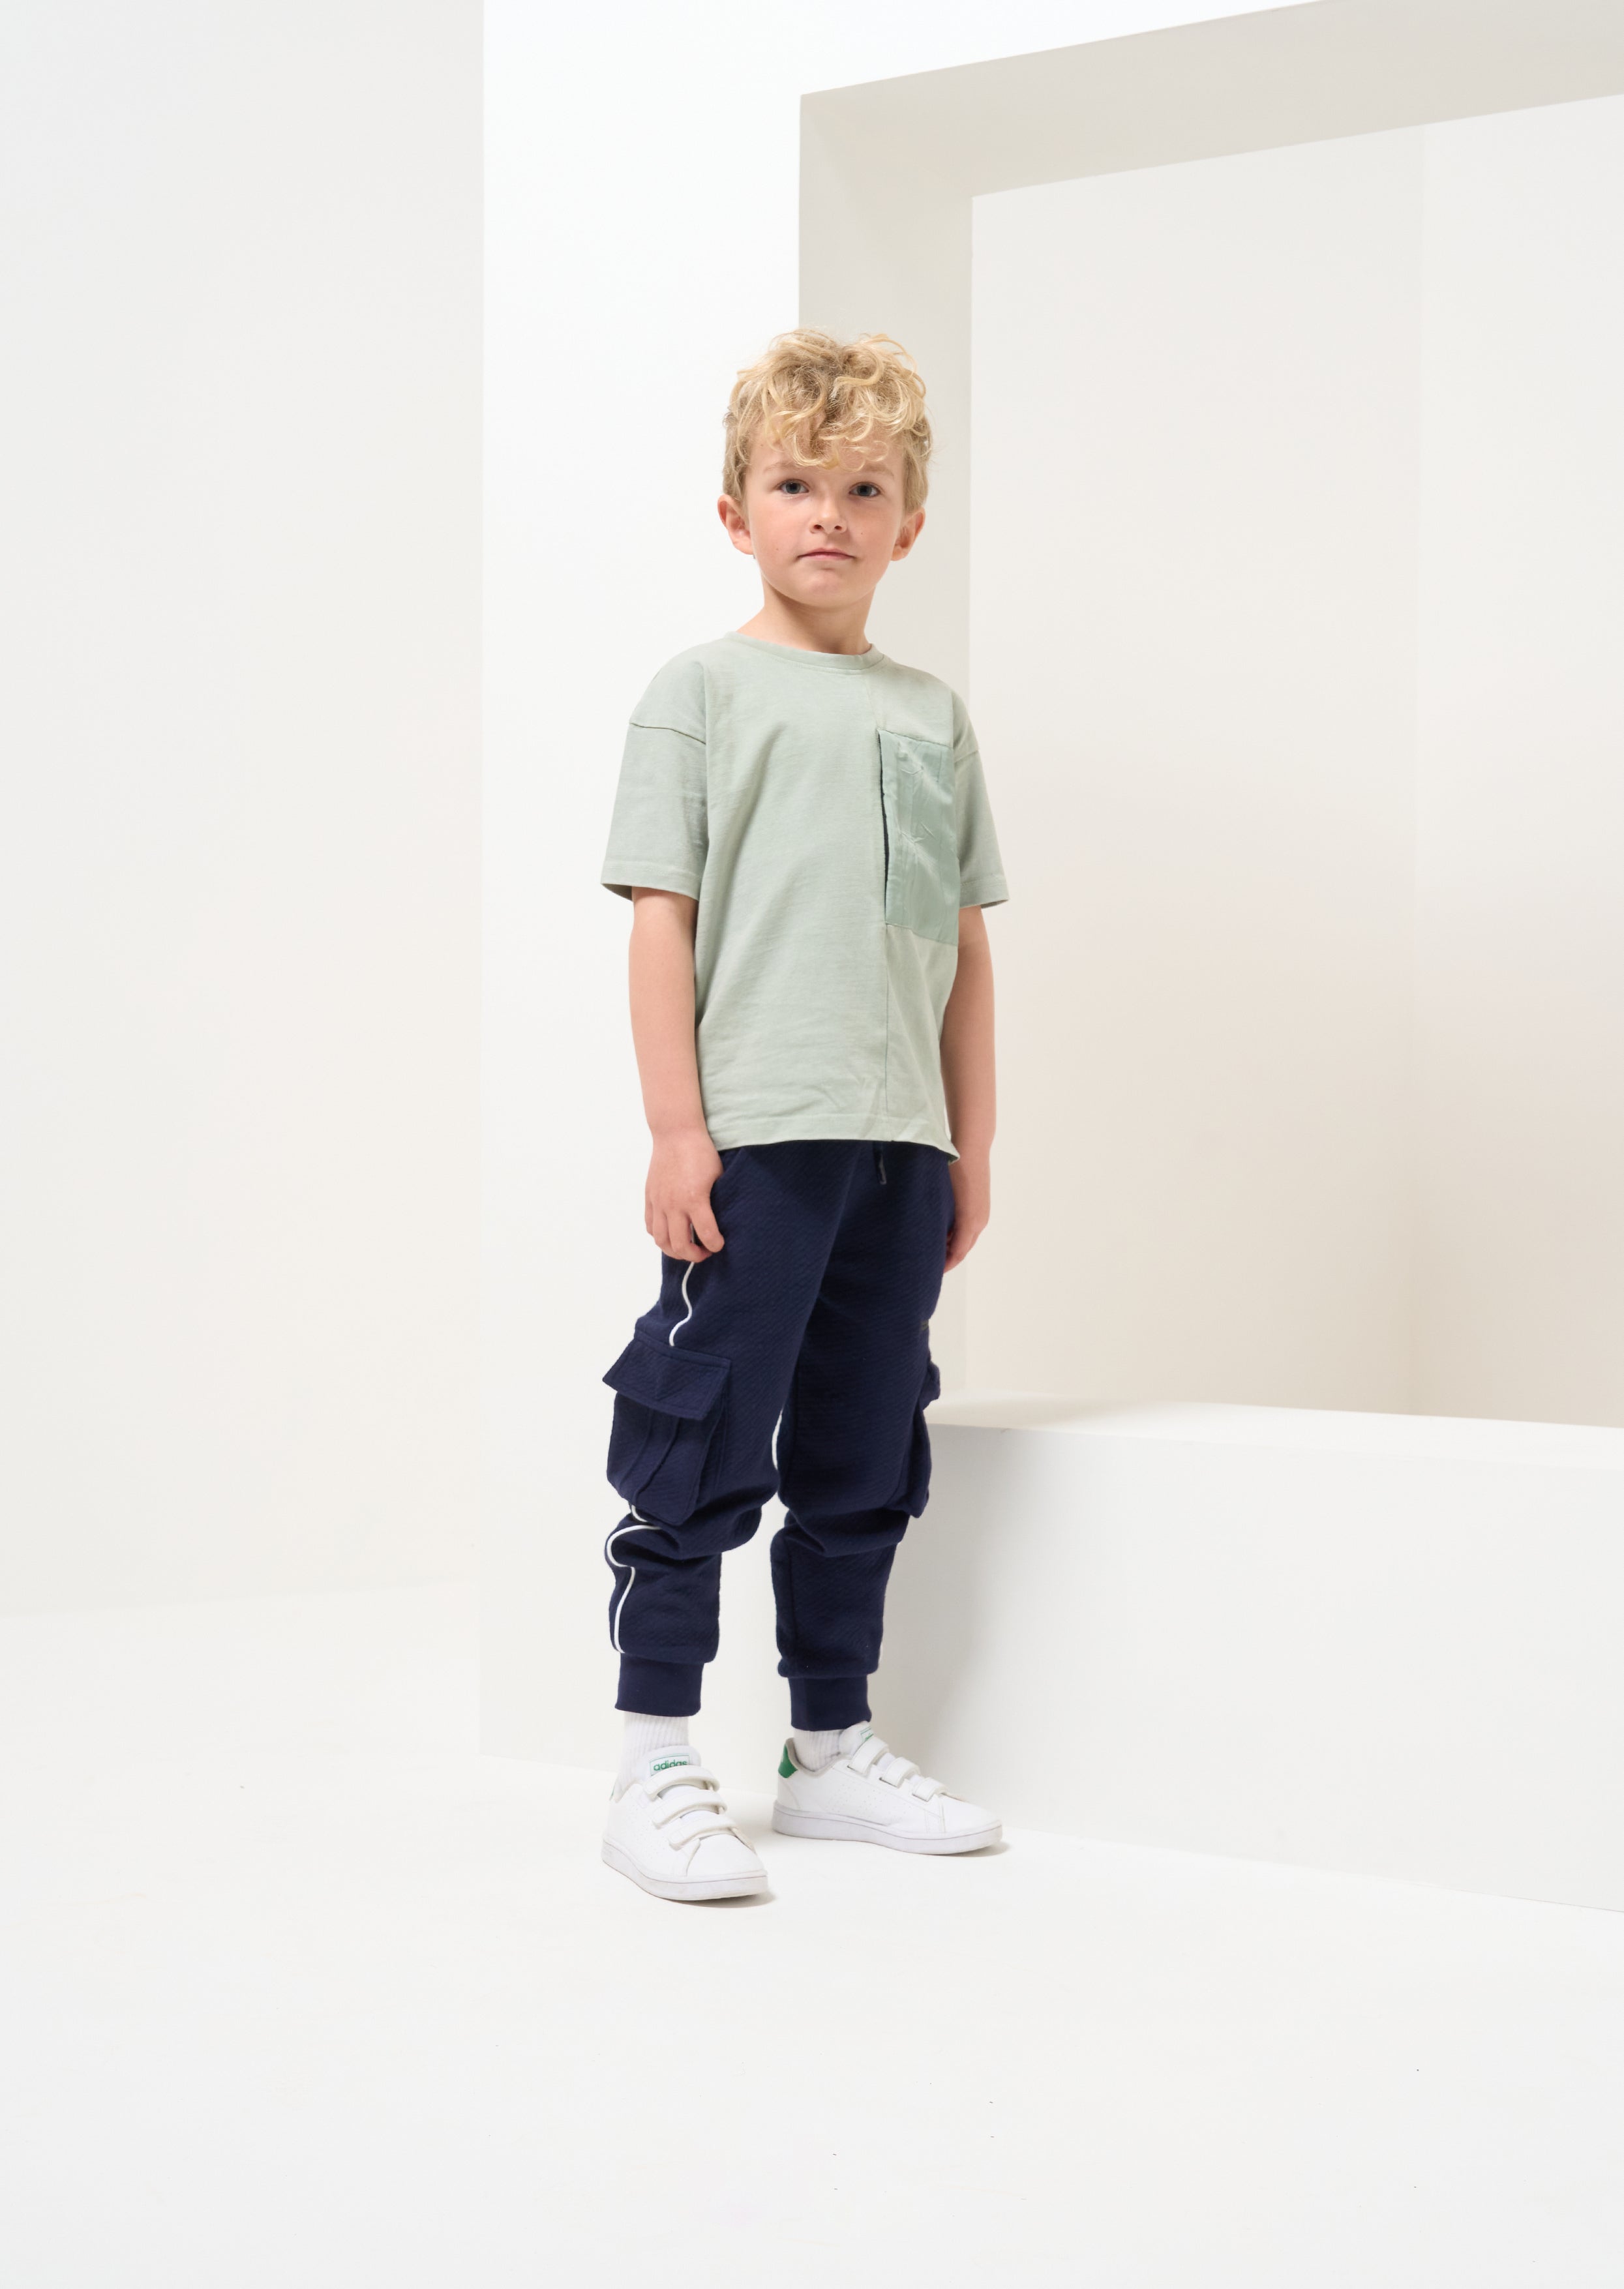 Boys Self Textured Green T-Shirt with Pocket